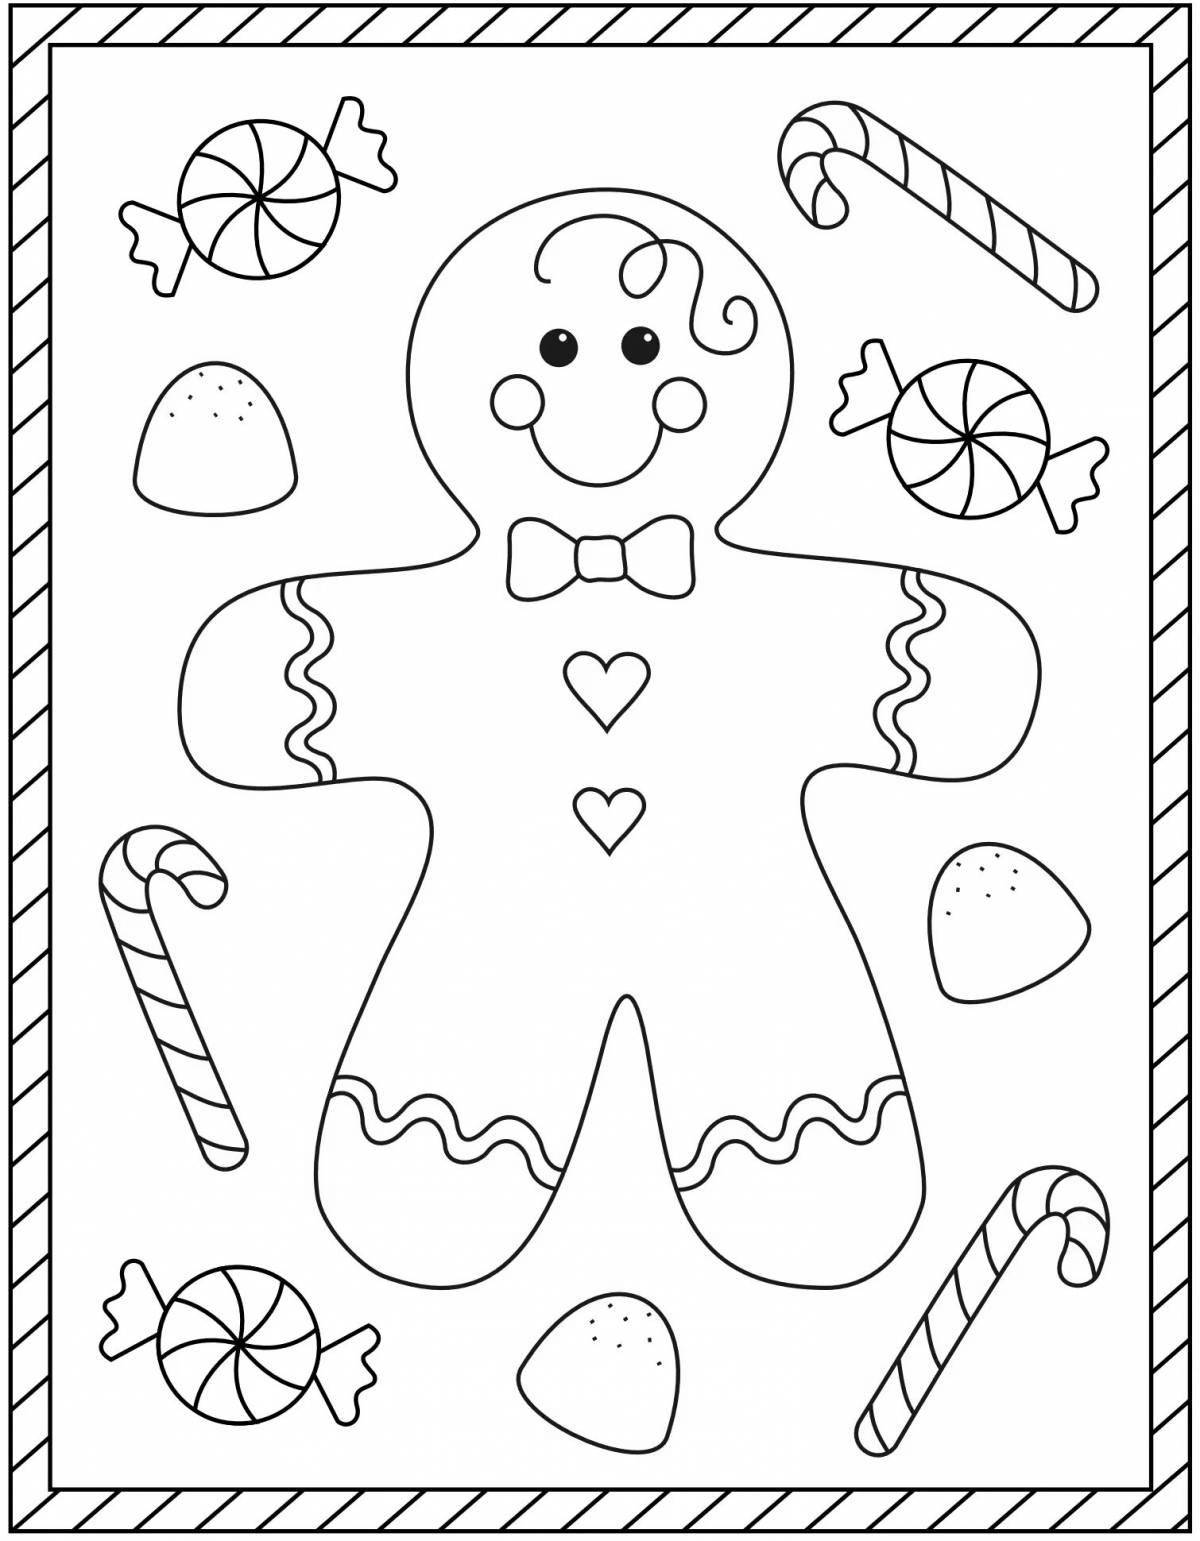 Coloring book of a cheerful gingerbread man